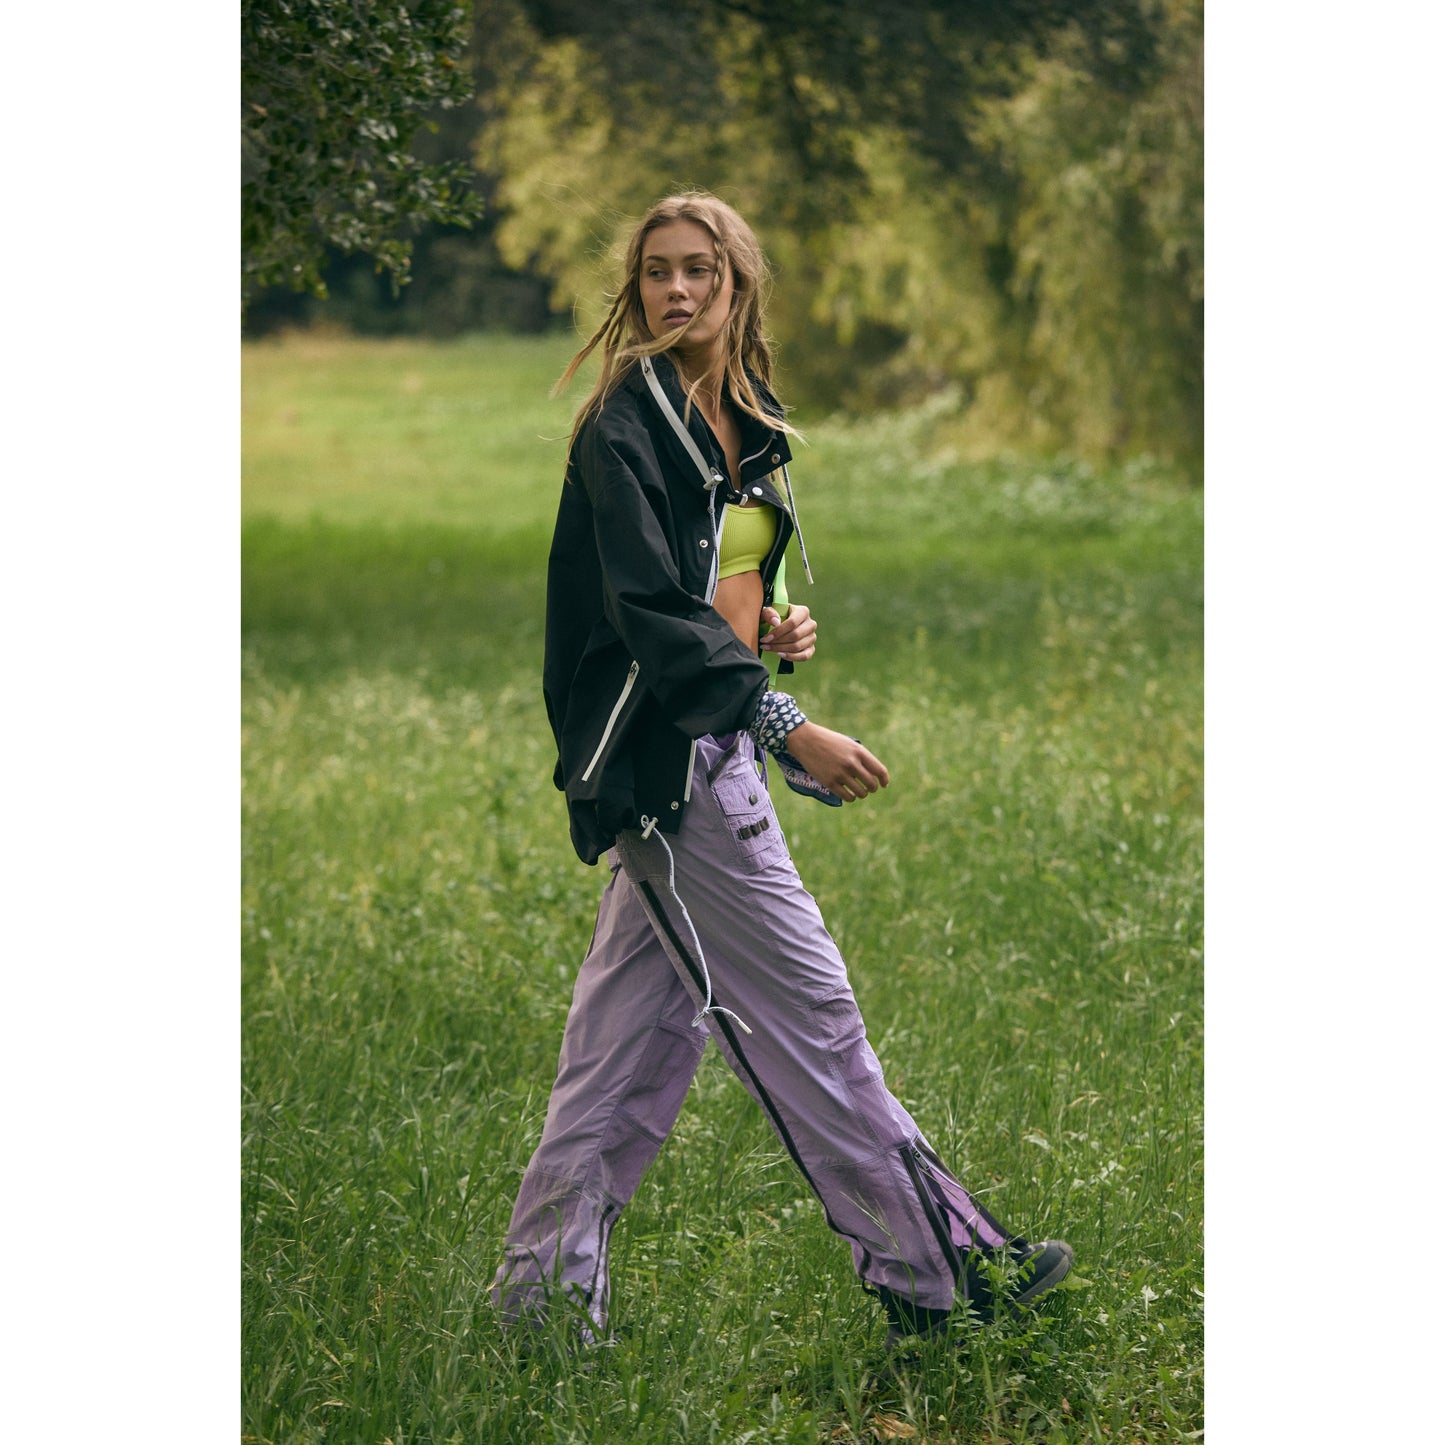 Young woman walking in a grassy field, wearing a Free People Movement Rain & Shine Jacket in Black, purple pants, and holding a yellow book.